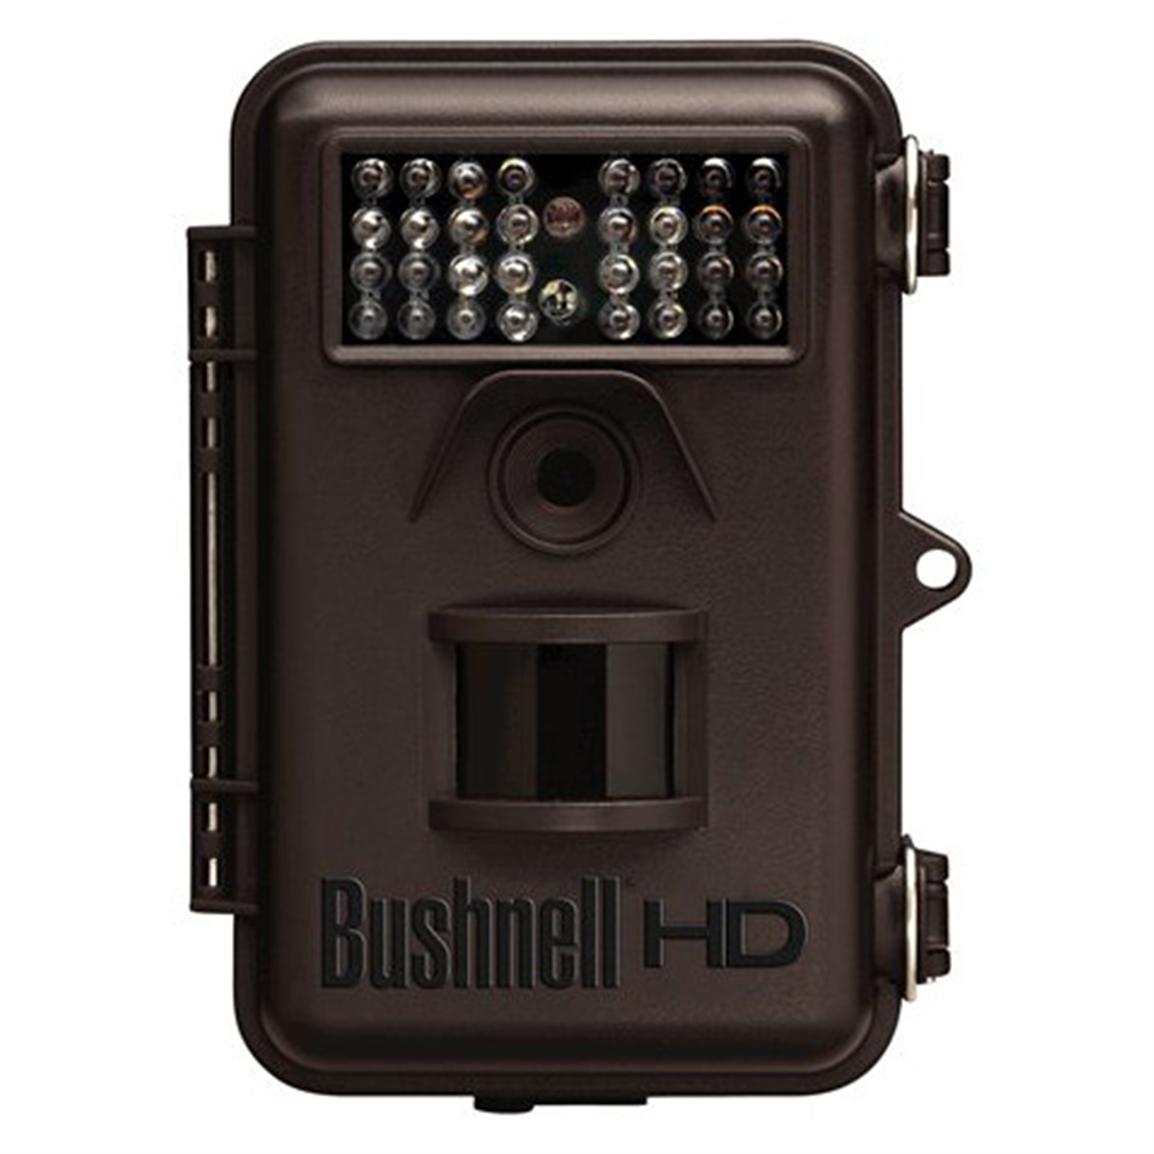 bushnell-trophy-cam-hd-8mp-infrared-game-camera-292188-game